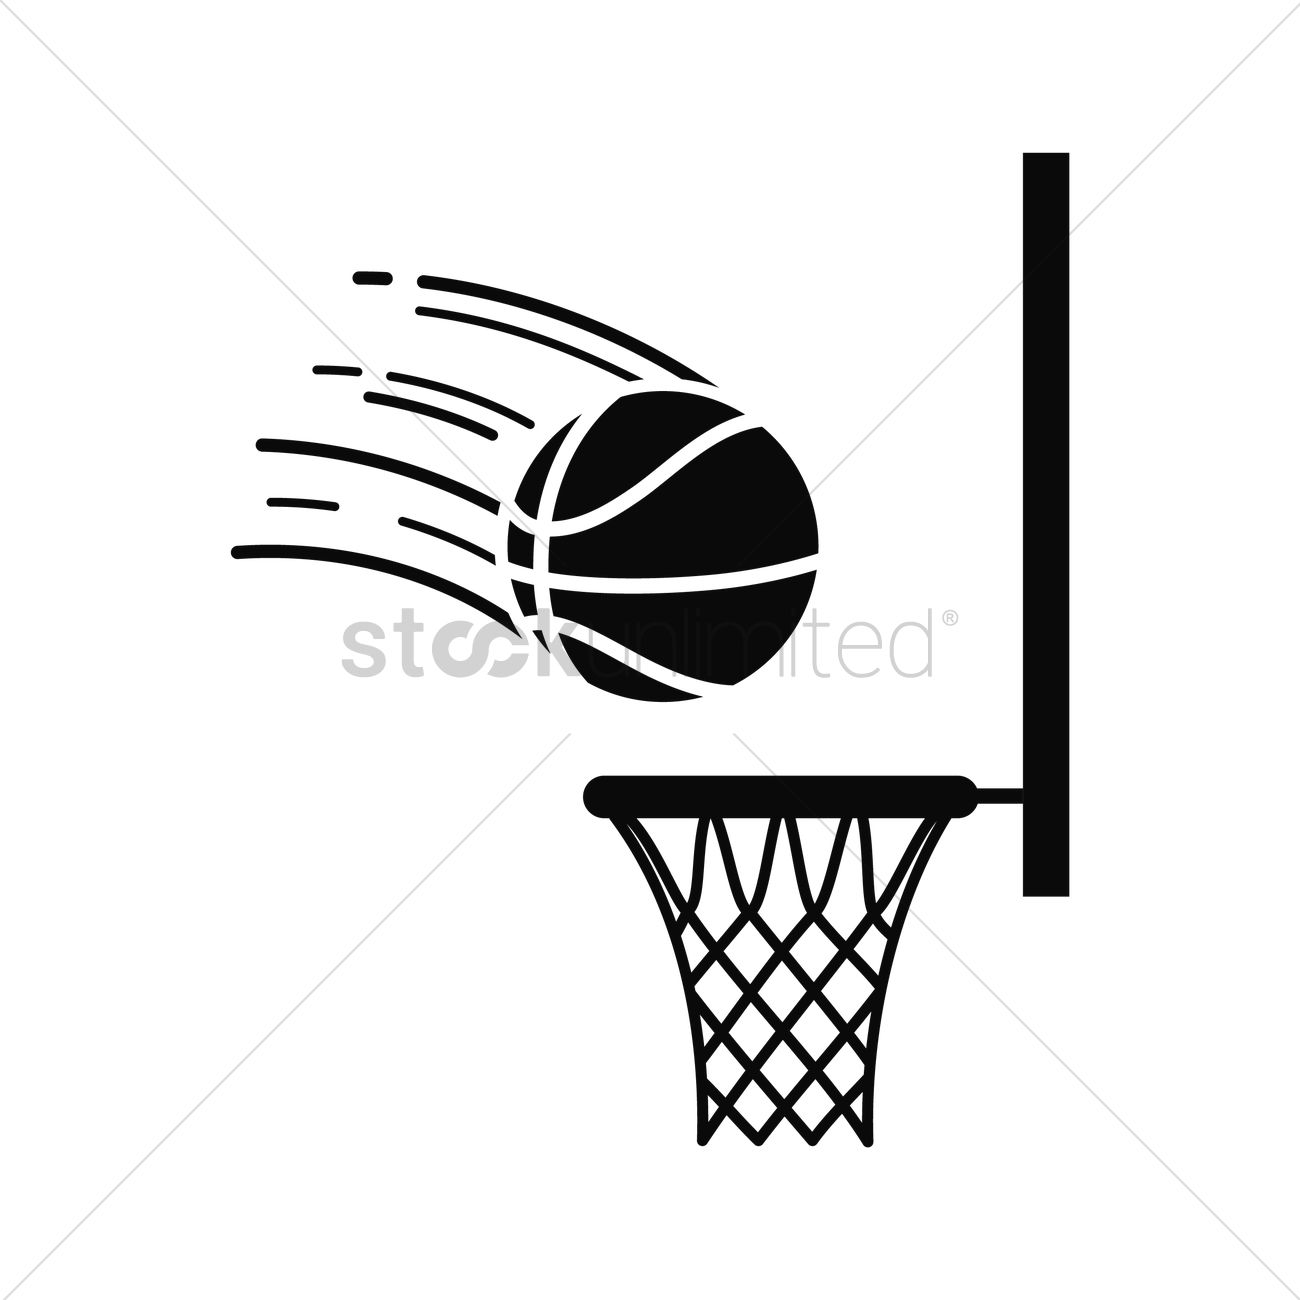 Basketball Going In Hoop Png - Basketball Going Into Hoop Vector Graphic, Transparent background PNG HD thumbnail